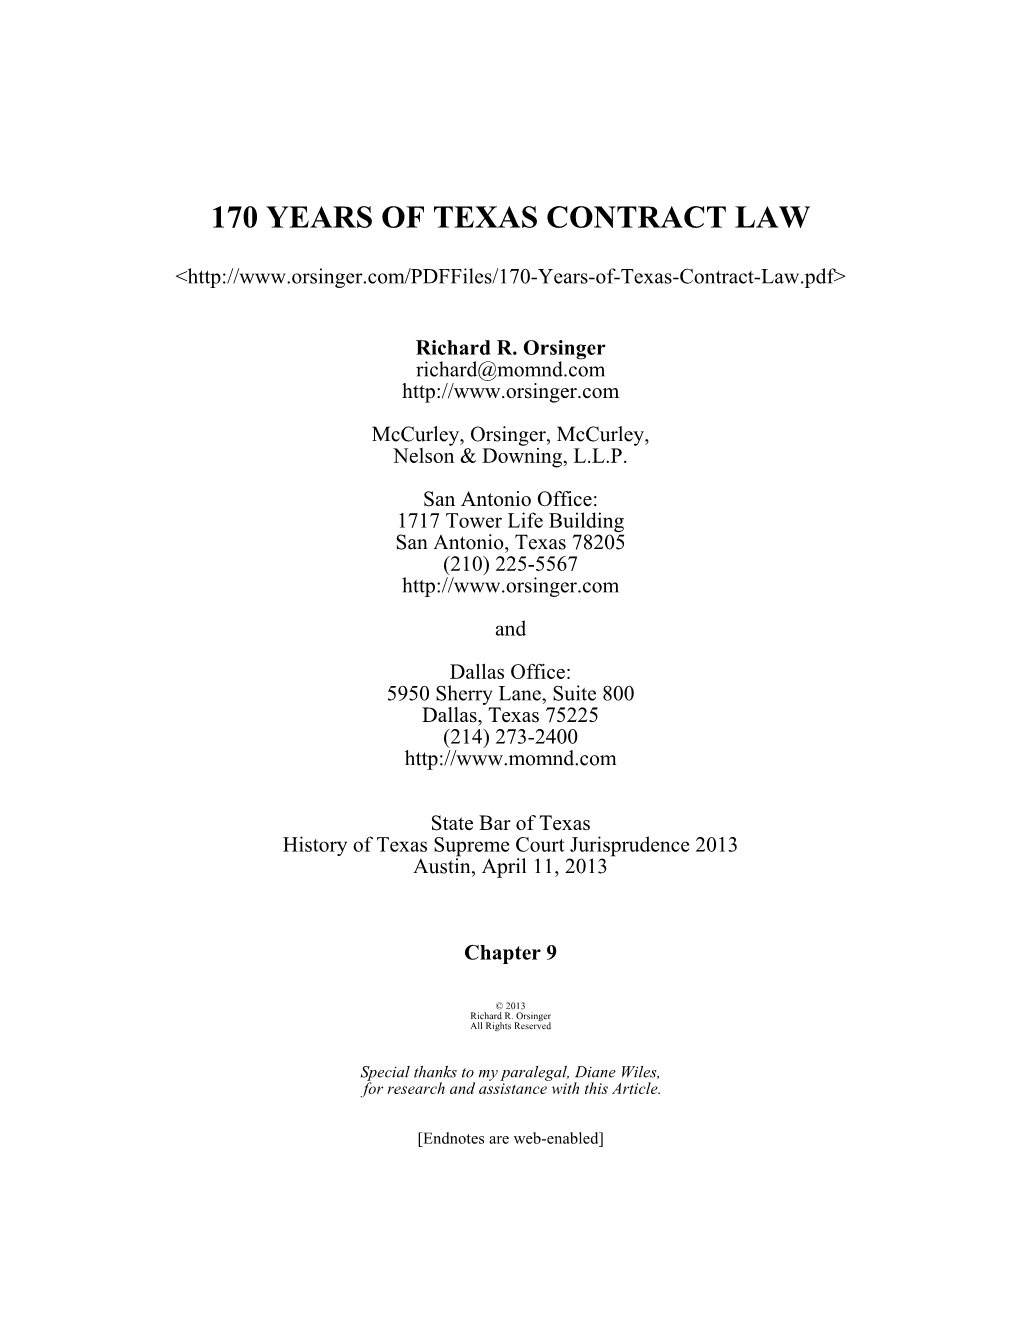 170 Years of Contract